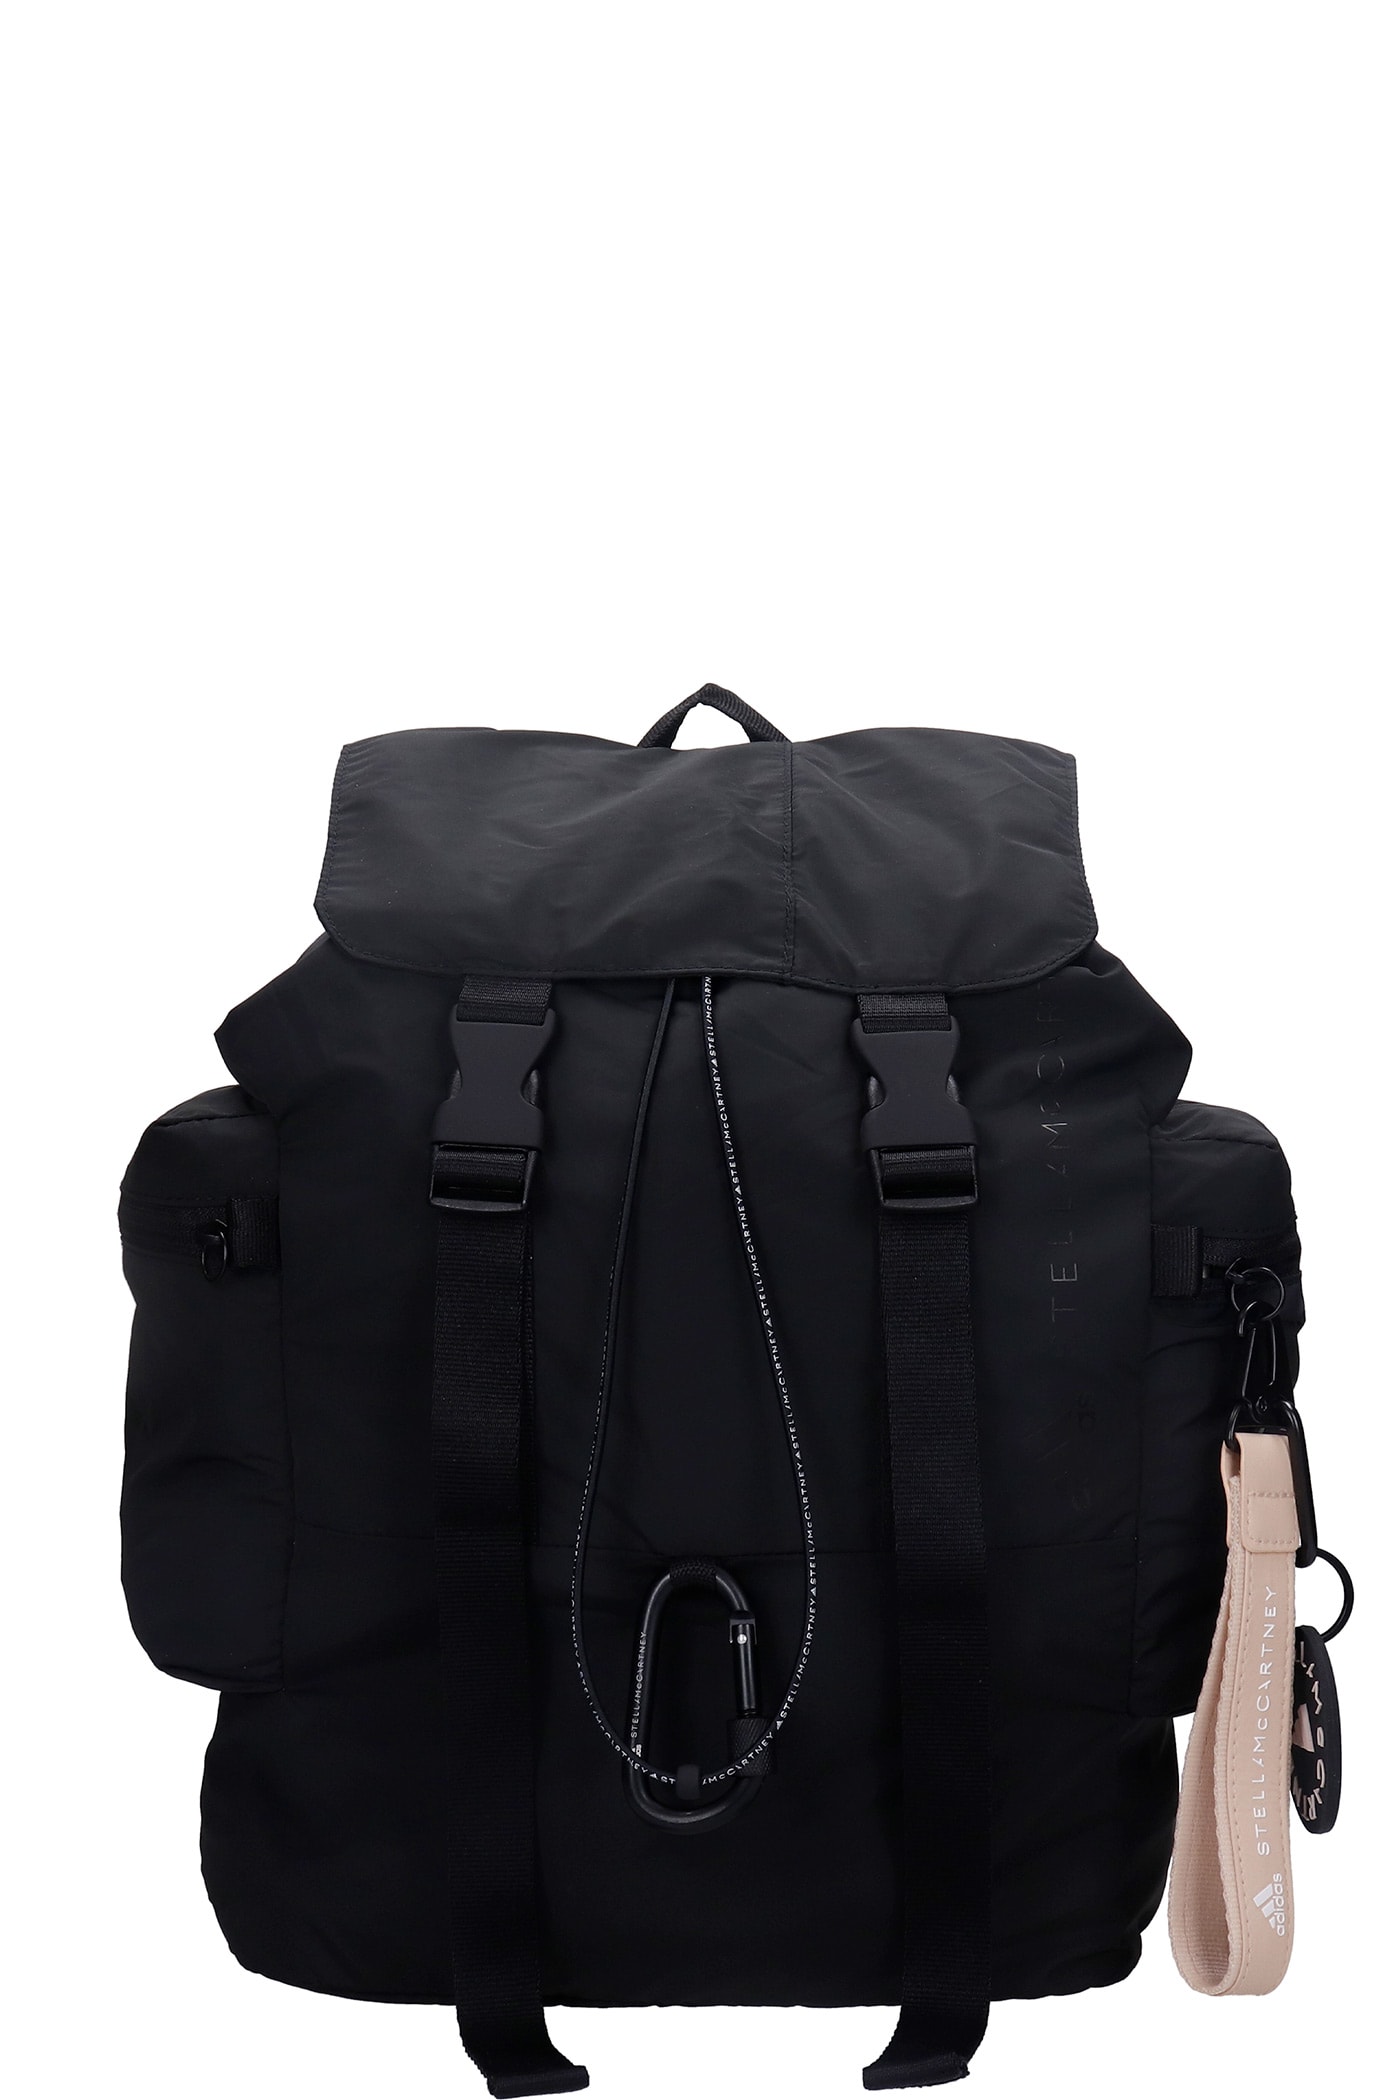 ADIDAS BY STELLA MCCARTNEY BACKPACK IN BLACK SYNTHETIC FIBERS,GL5441